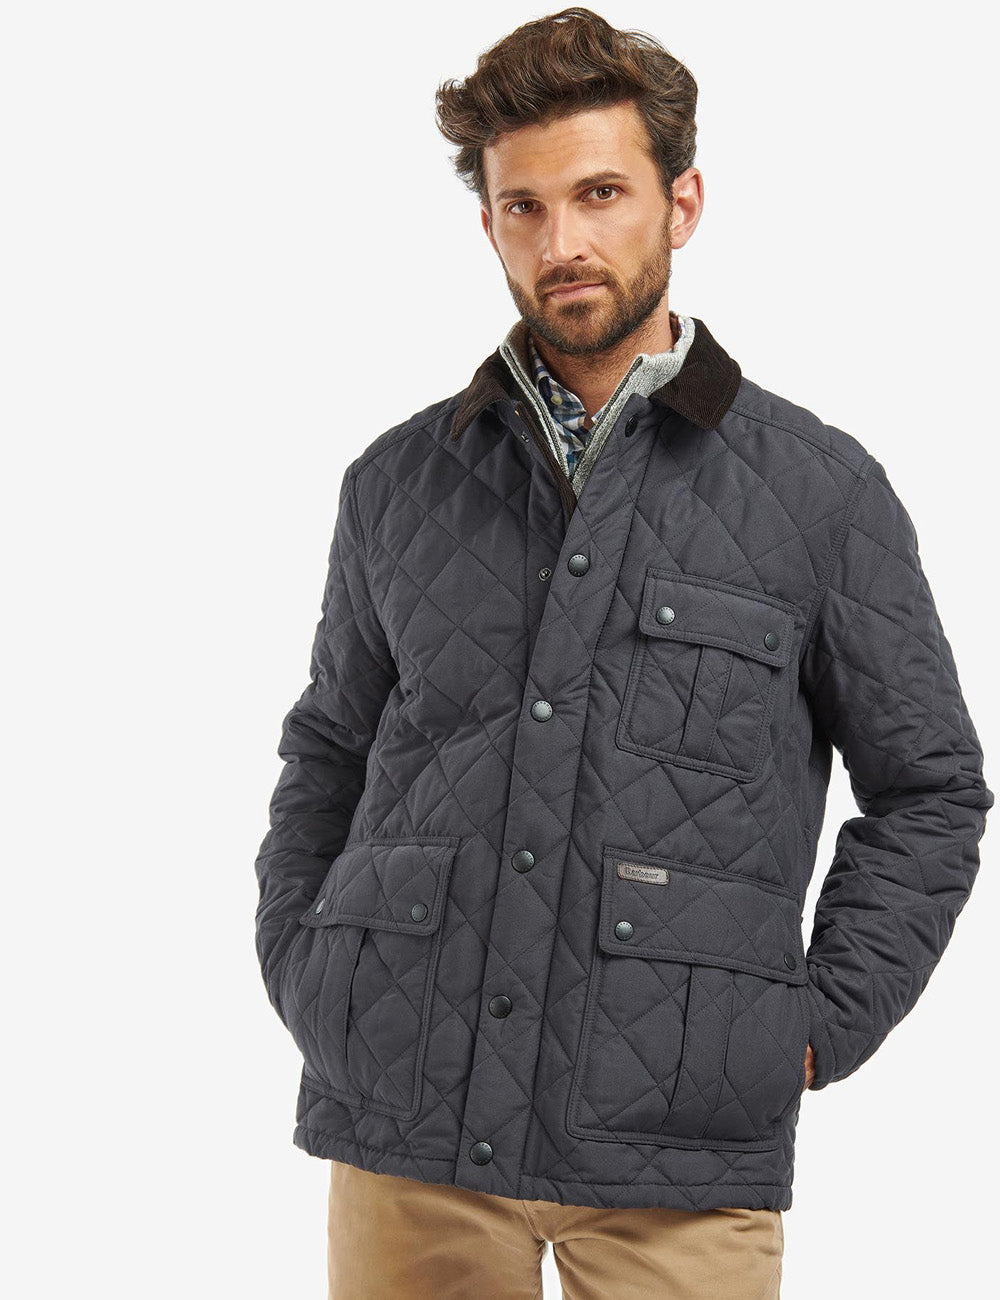 Man wearing the Horsley Quilted Jacket in Navy from Barbour